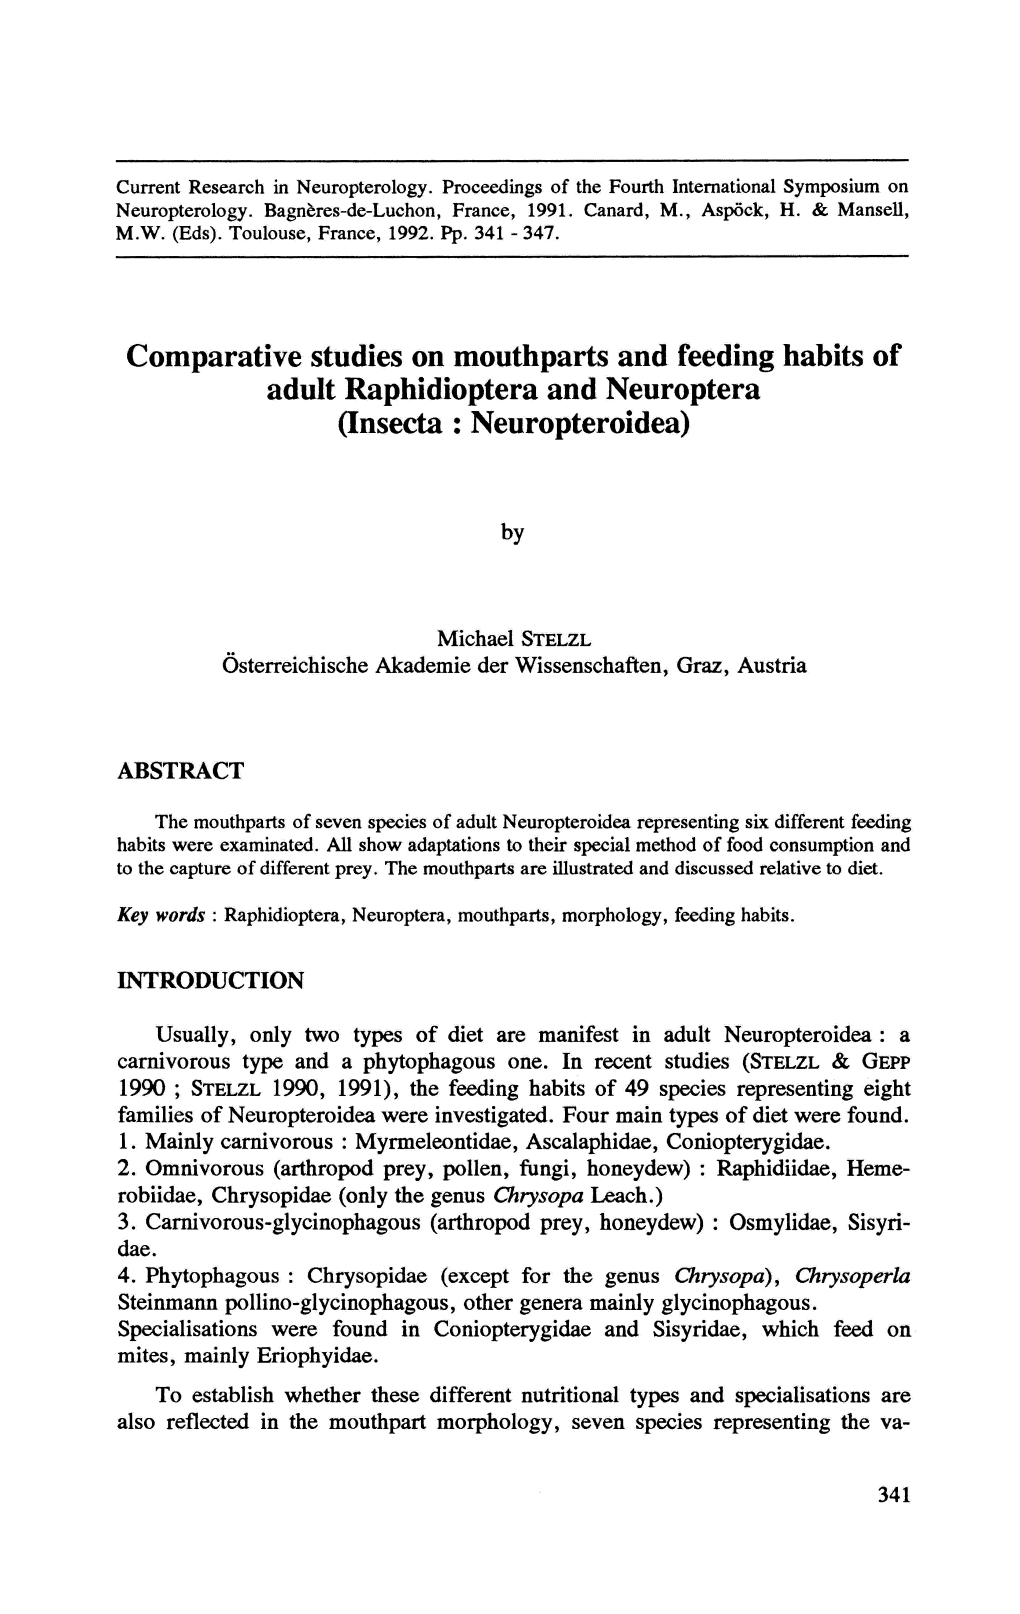 Comparative Studies on Mouthparts and Feeding Habits of Adult Raphidioptera and Neuroptera (Insecta :Neuropteroidea)